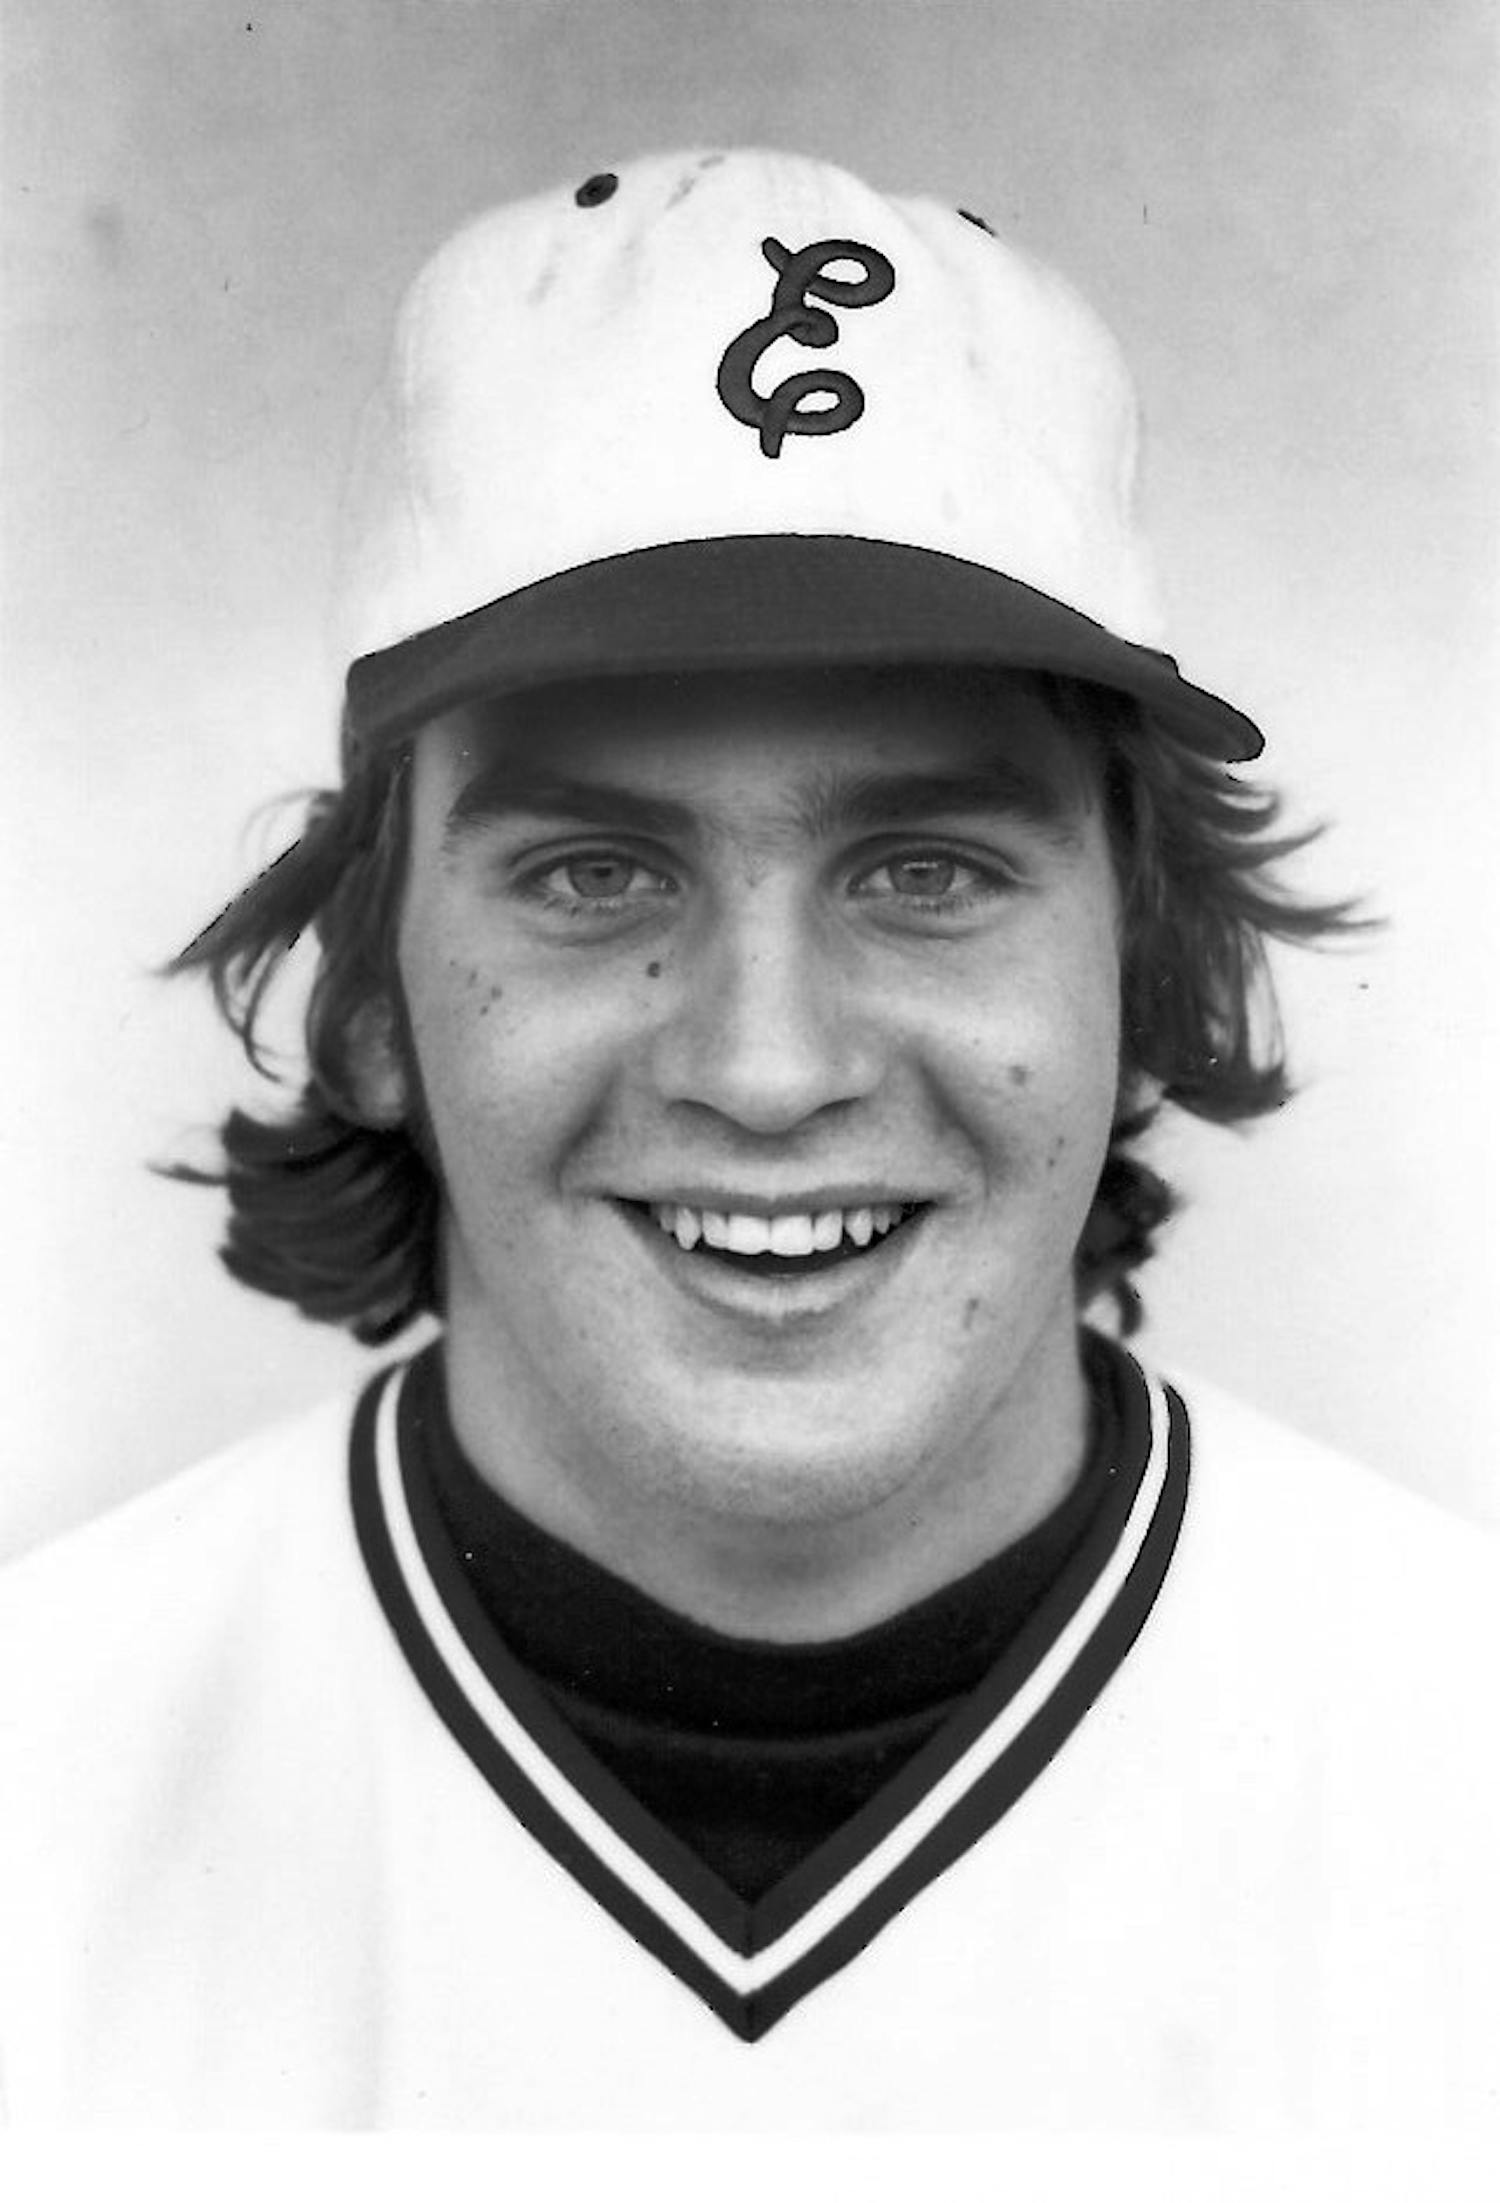 	Bob Welch played for Eastern from 1974-76, compiling a 17-6 record with a 1.84 career ERA and was named to the All Mid-American Conference first team in 1976.